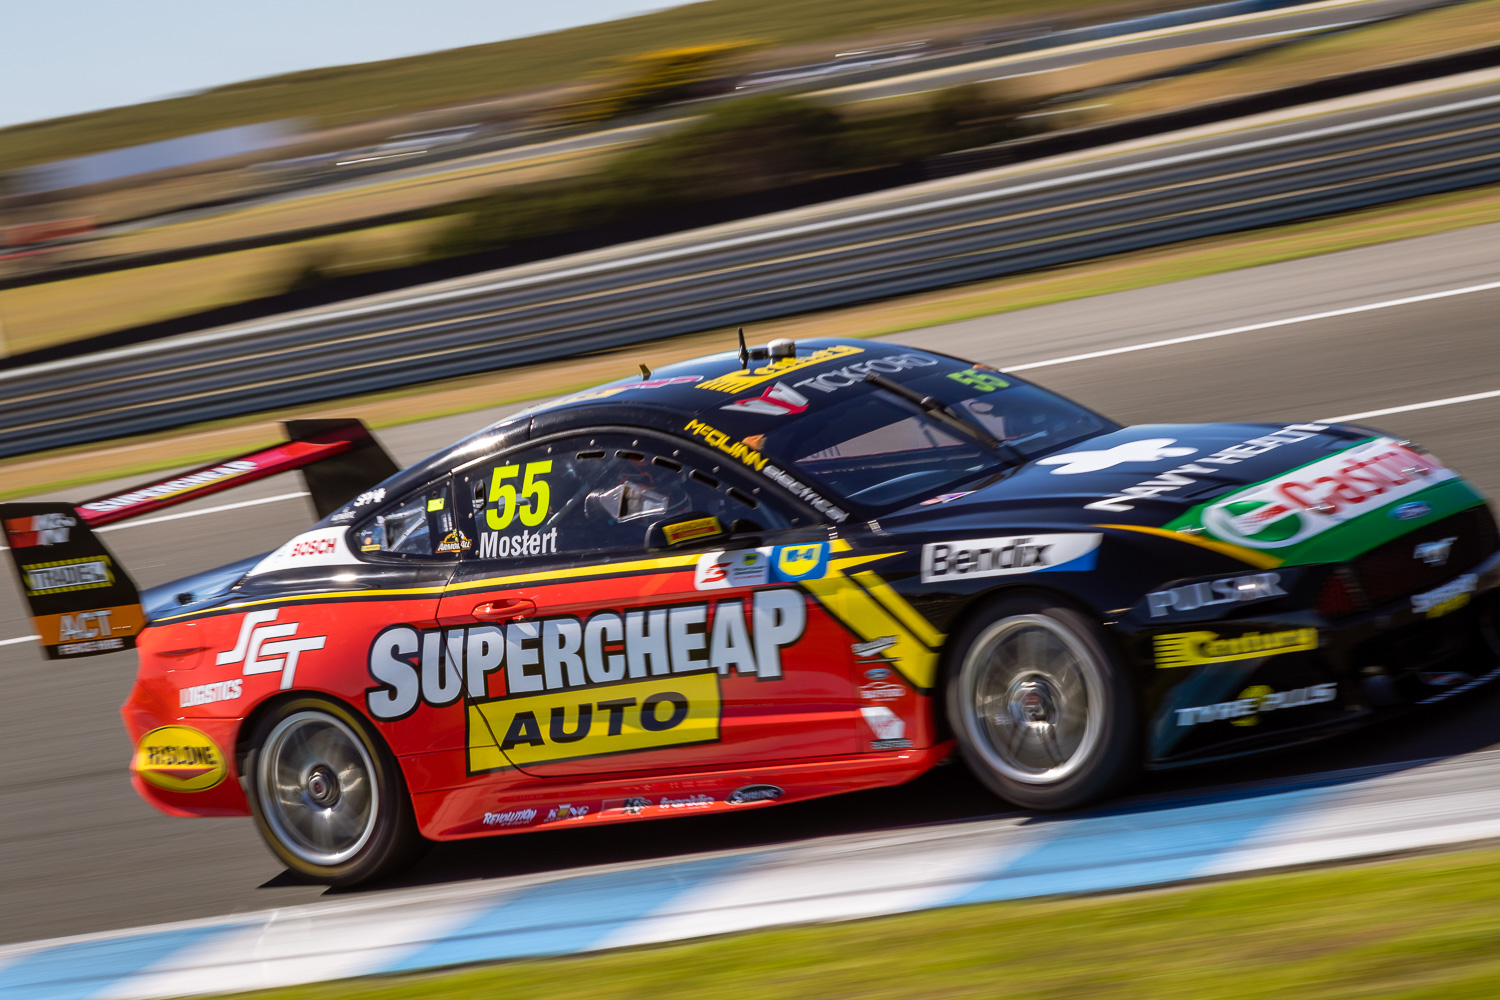 Tickford Racing's Supercheap Auto Ford Mustang|